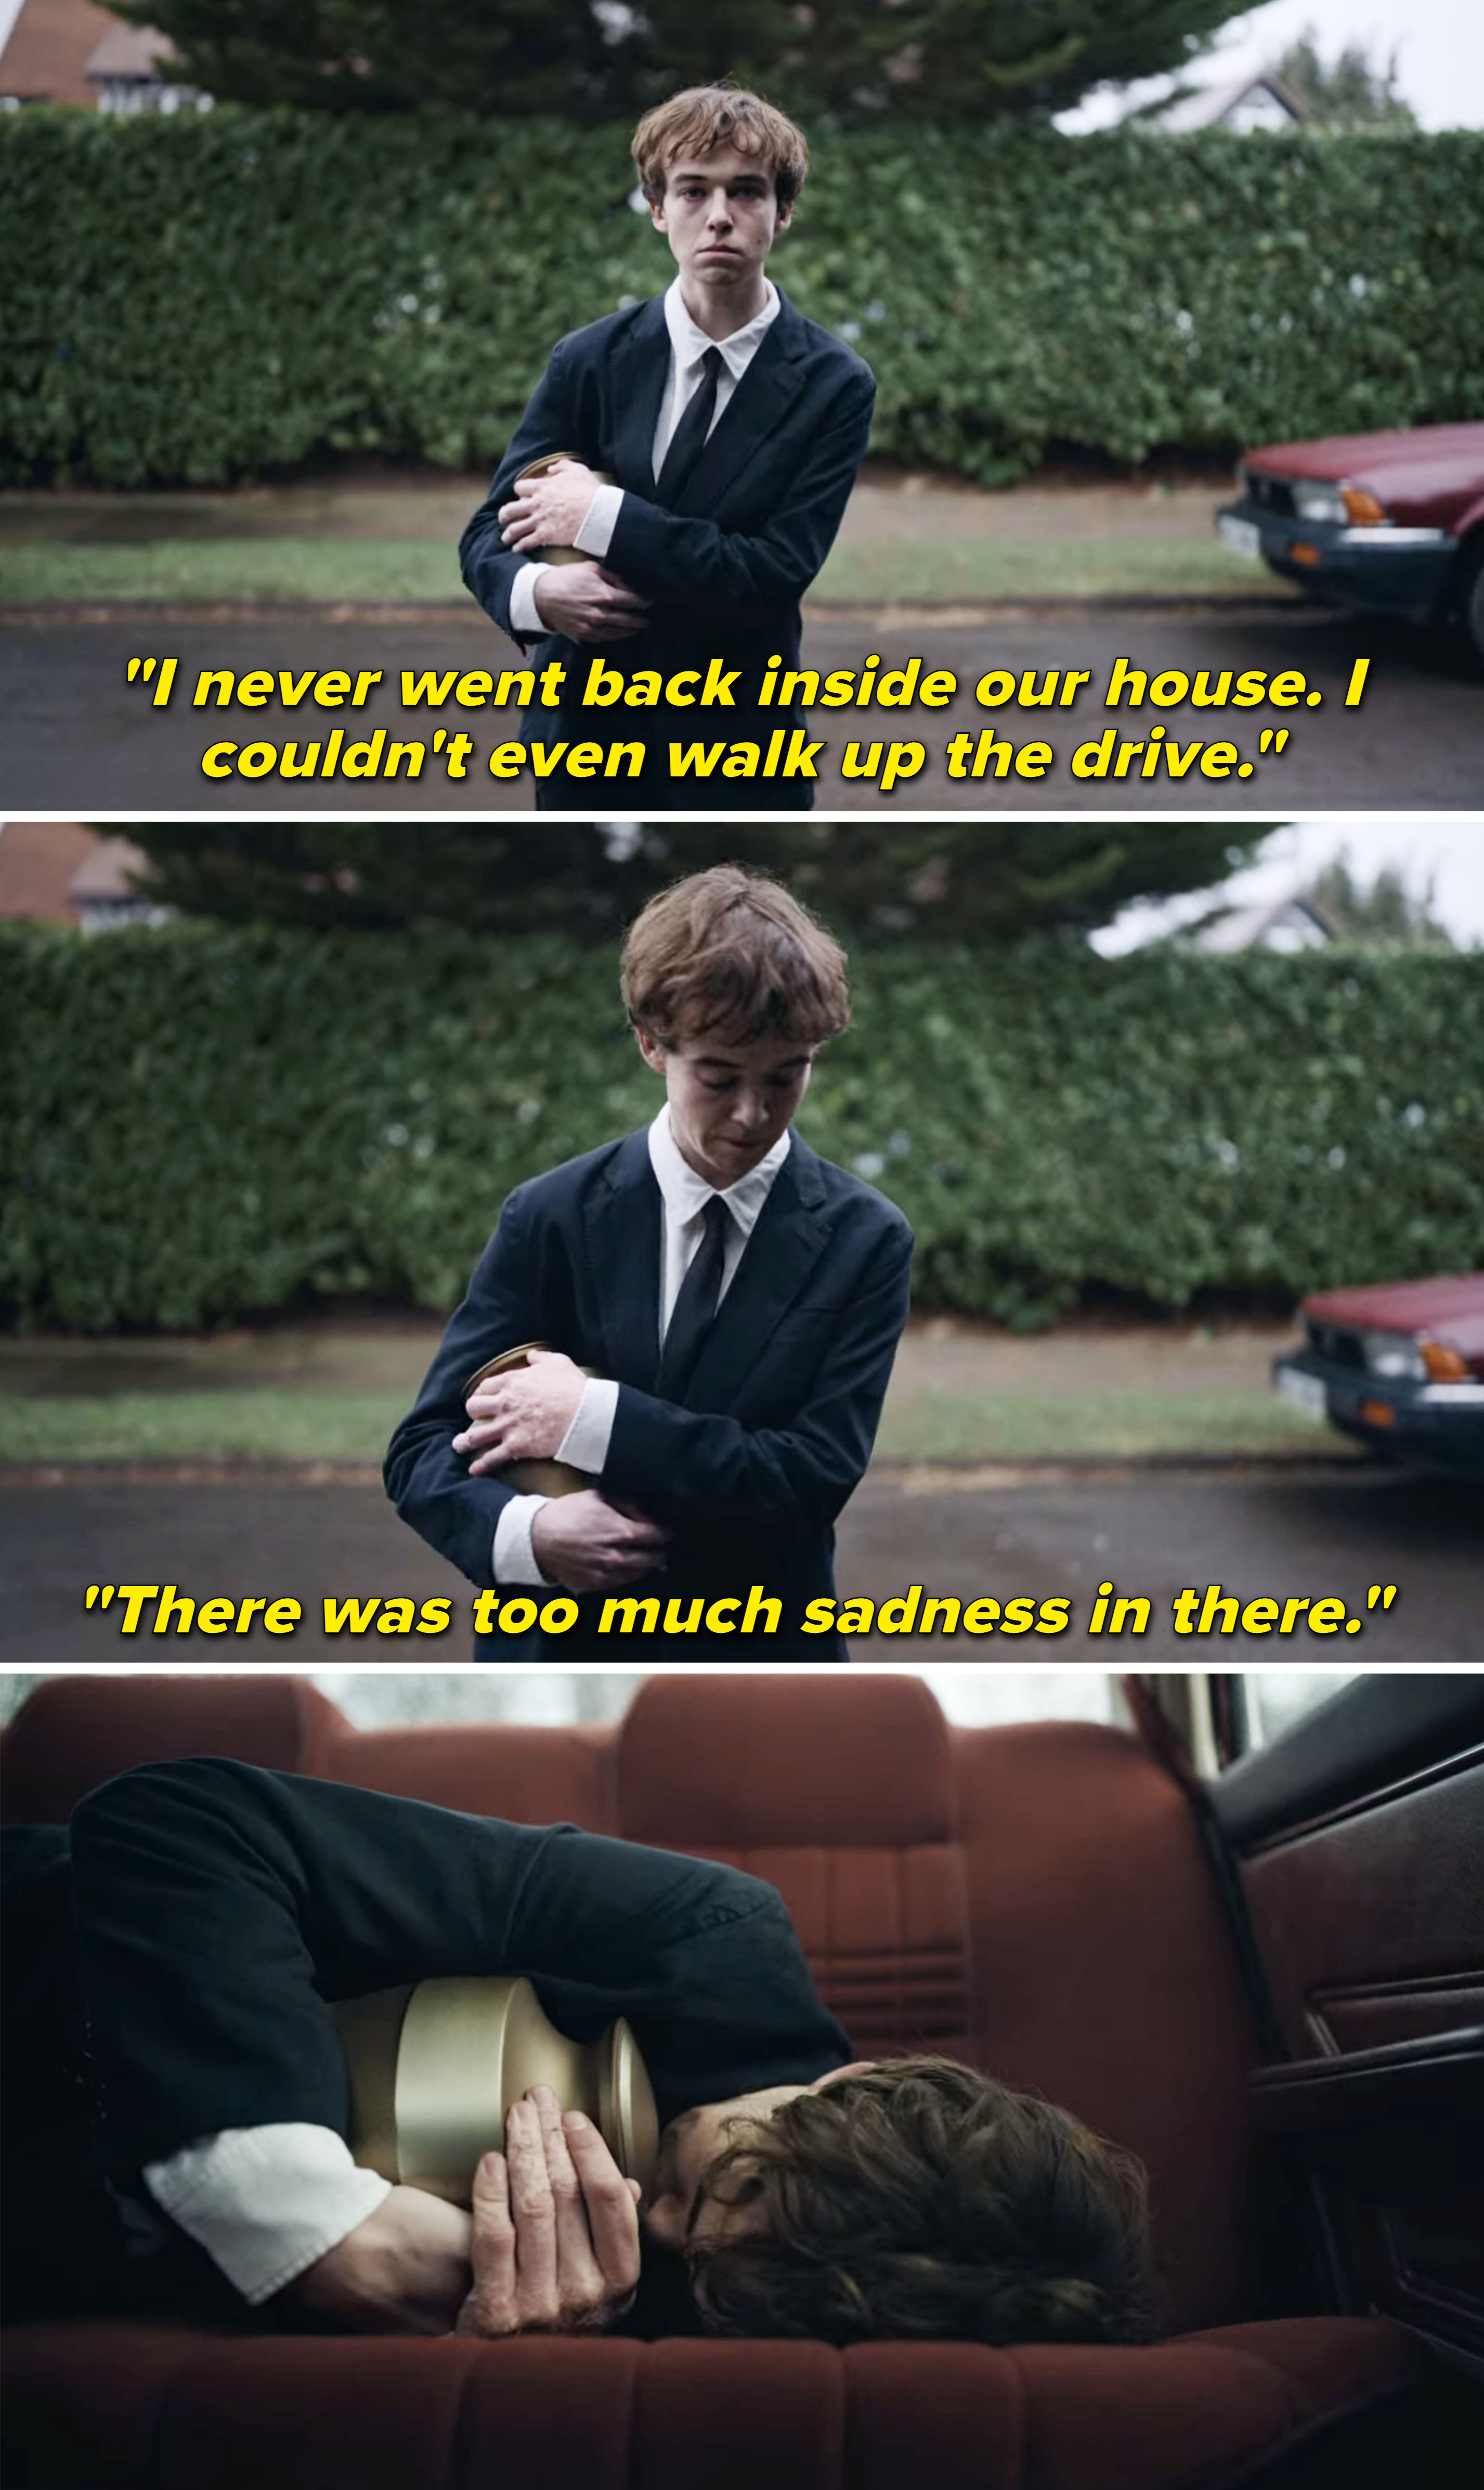 his character saying he couldn&#x27;t walk inside the house because it was too sad and then crying in the backseat of a car while holding an urn